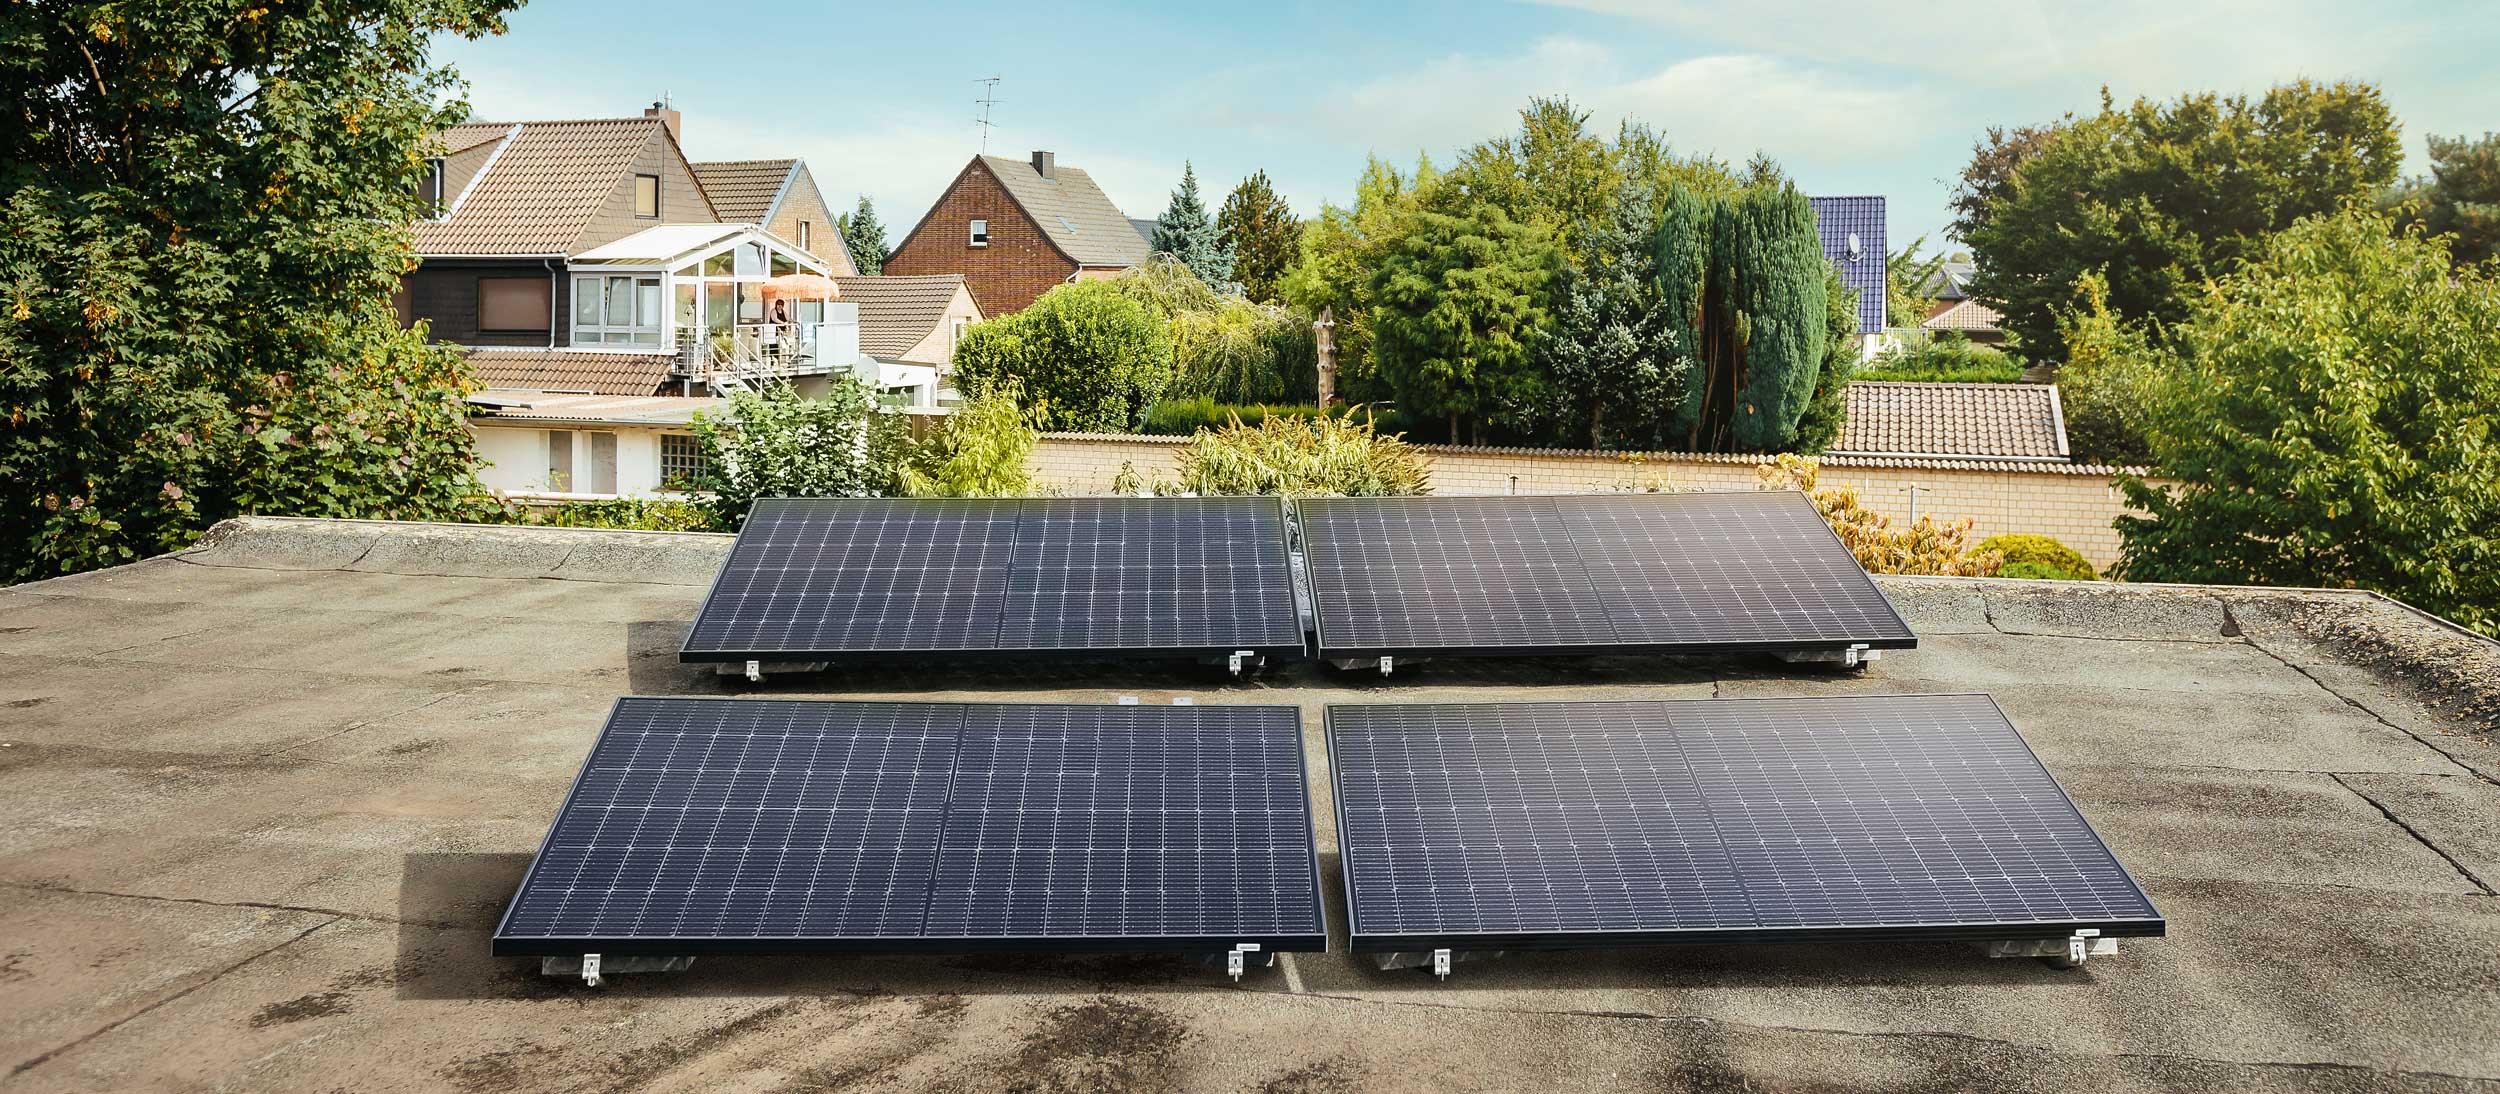 Discover the Advantages of Investing in Solar Panels for Your Home